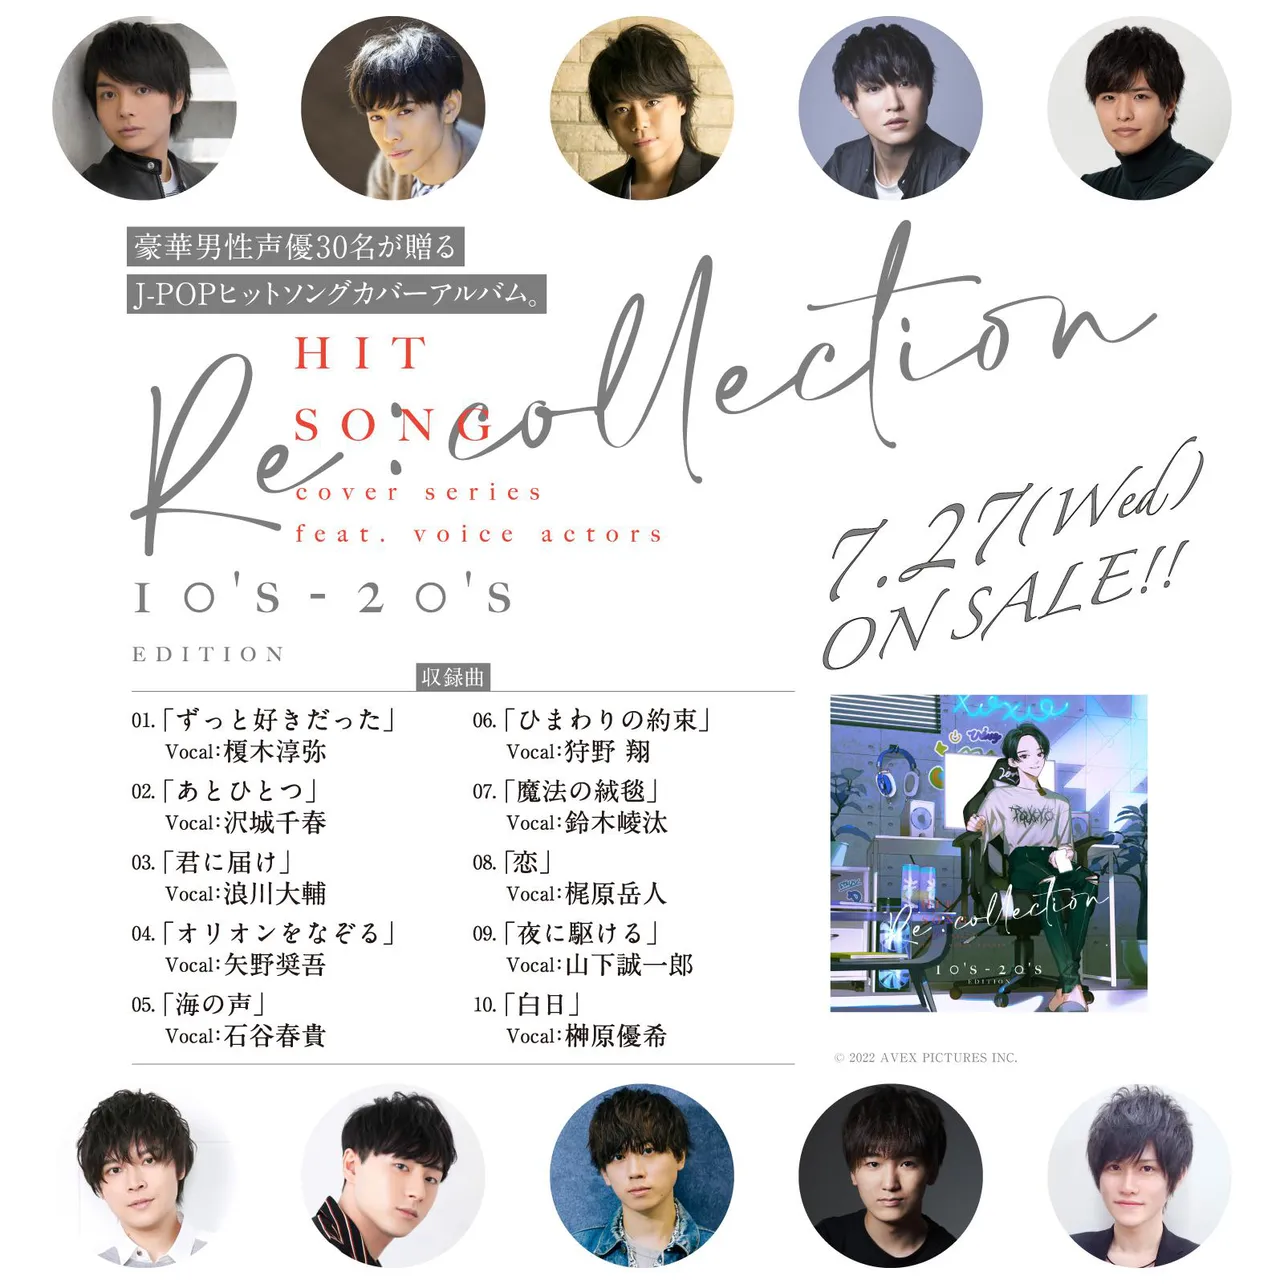 「[Recollection] HIT SONG cover series feat.voice actors~10's-20's EDITION~」収録曲一覧